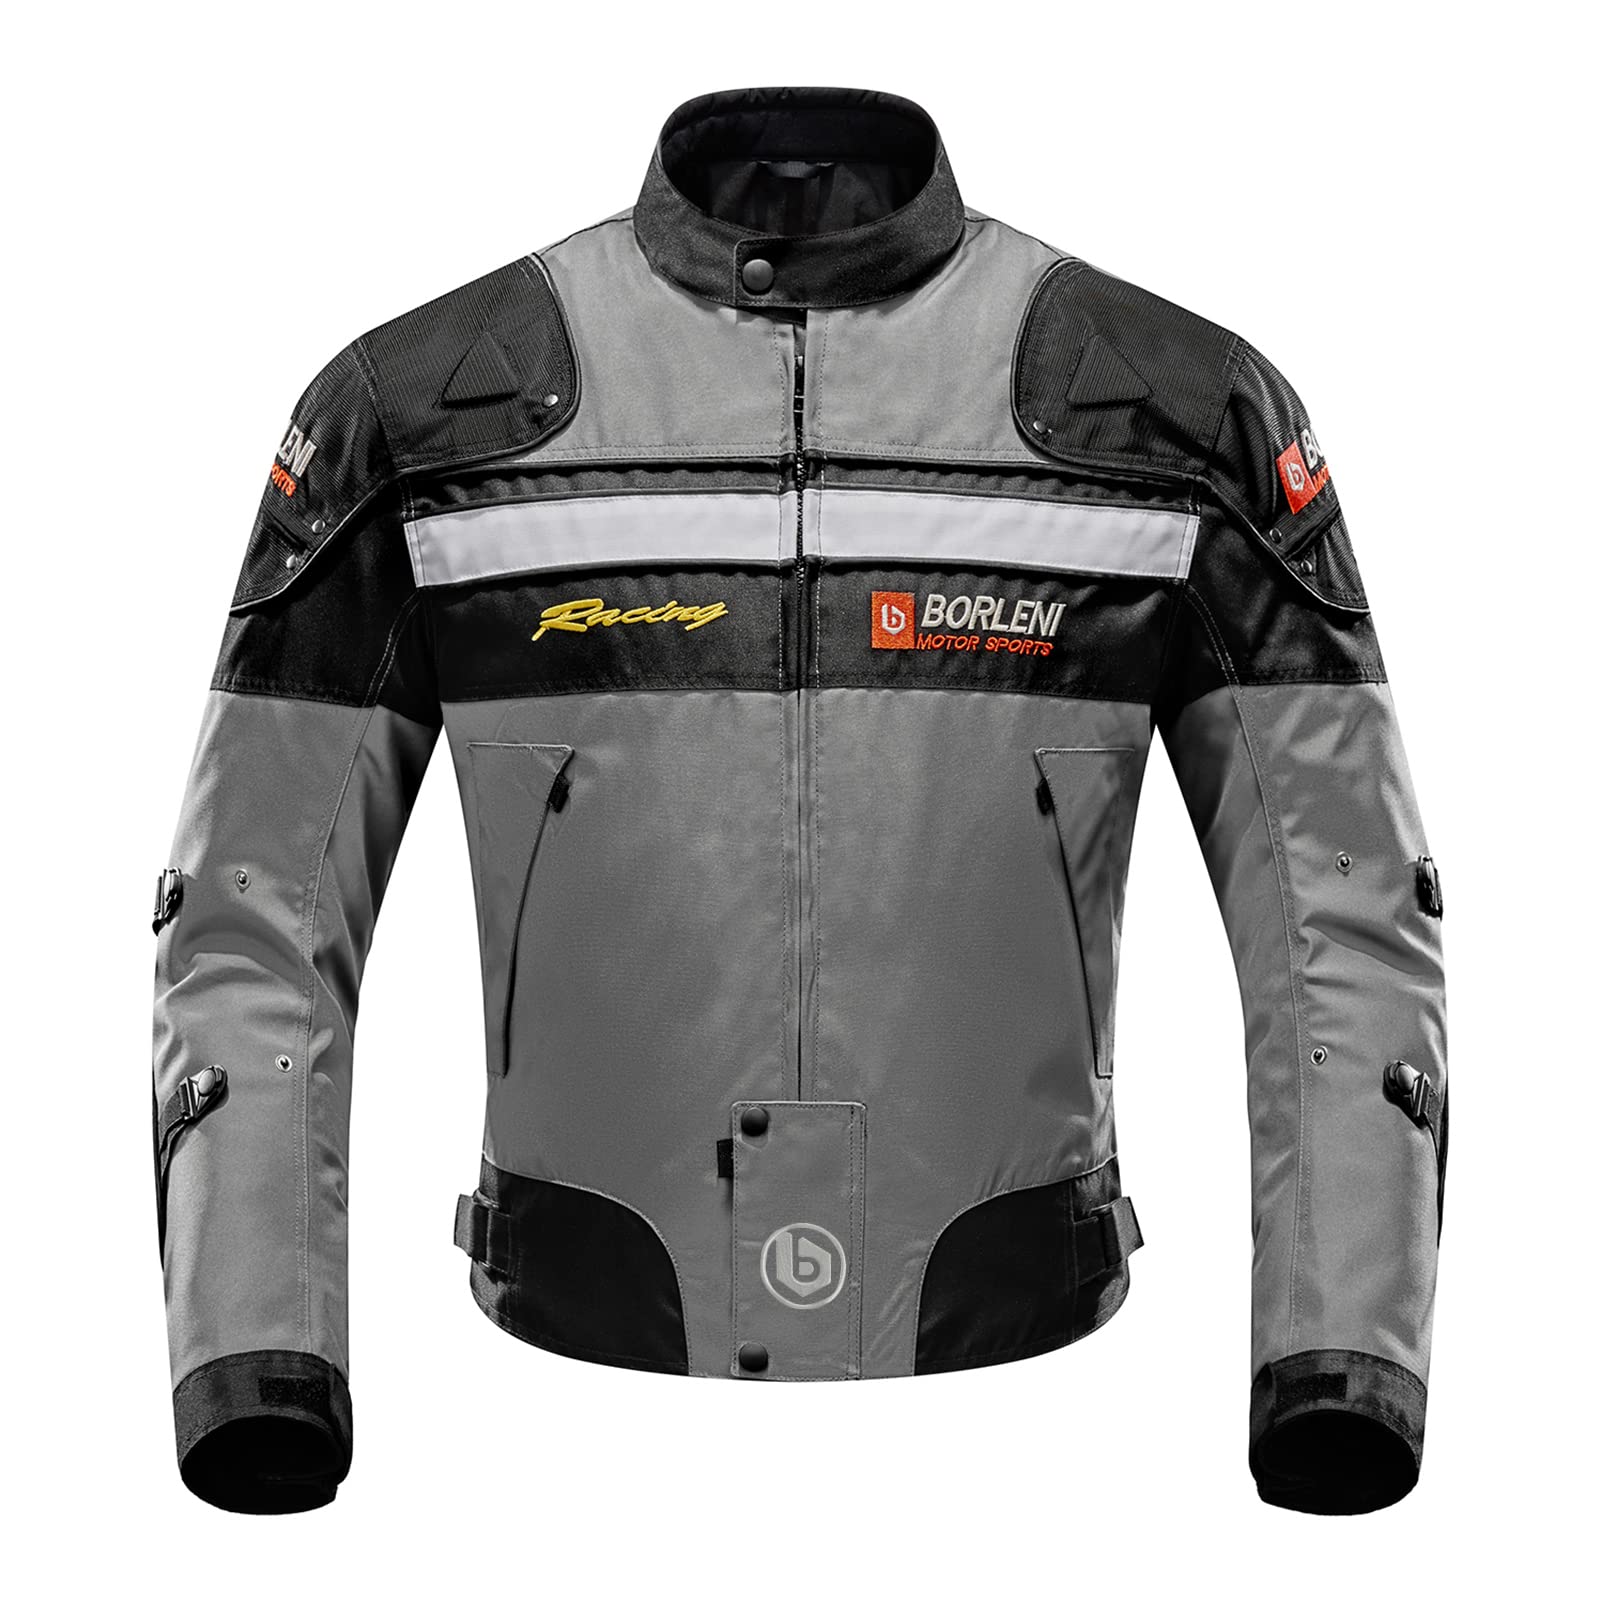 | Jacket D-020 IRONJIAS Motorcycle Armor – Windproof